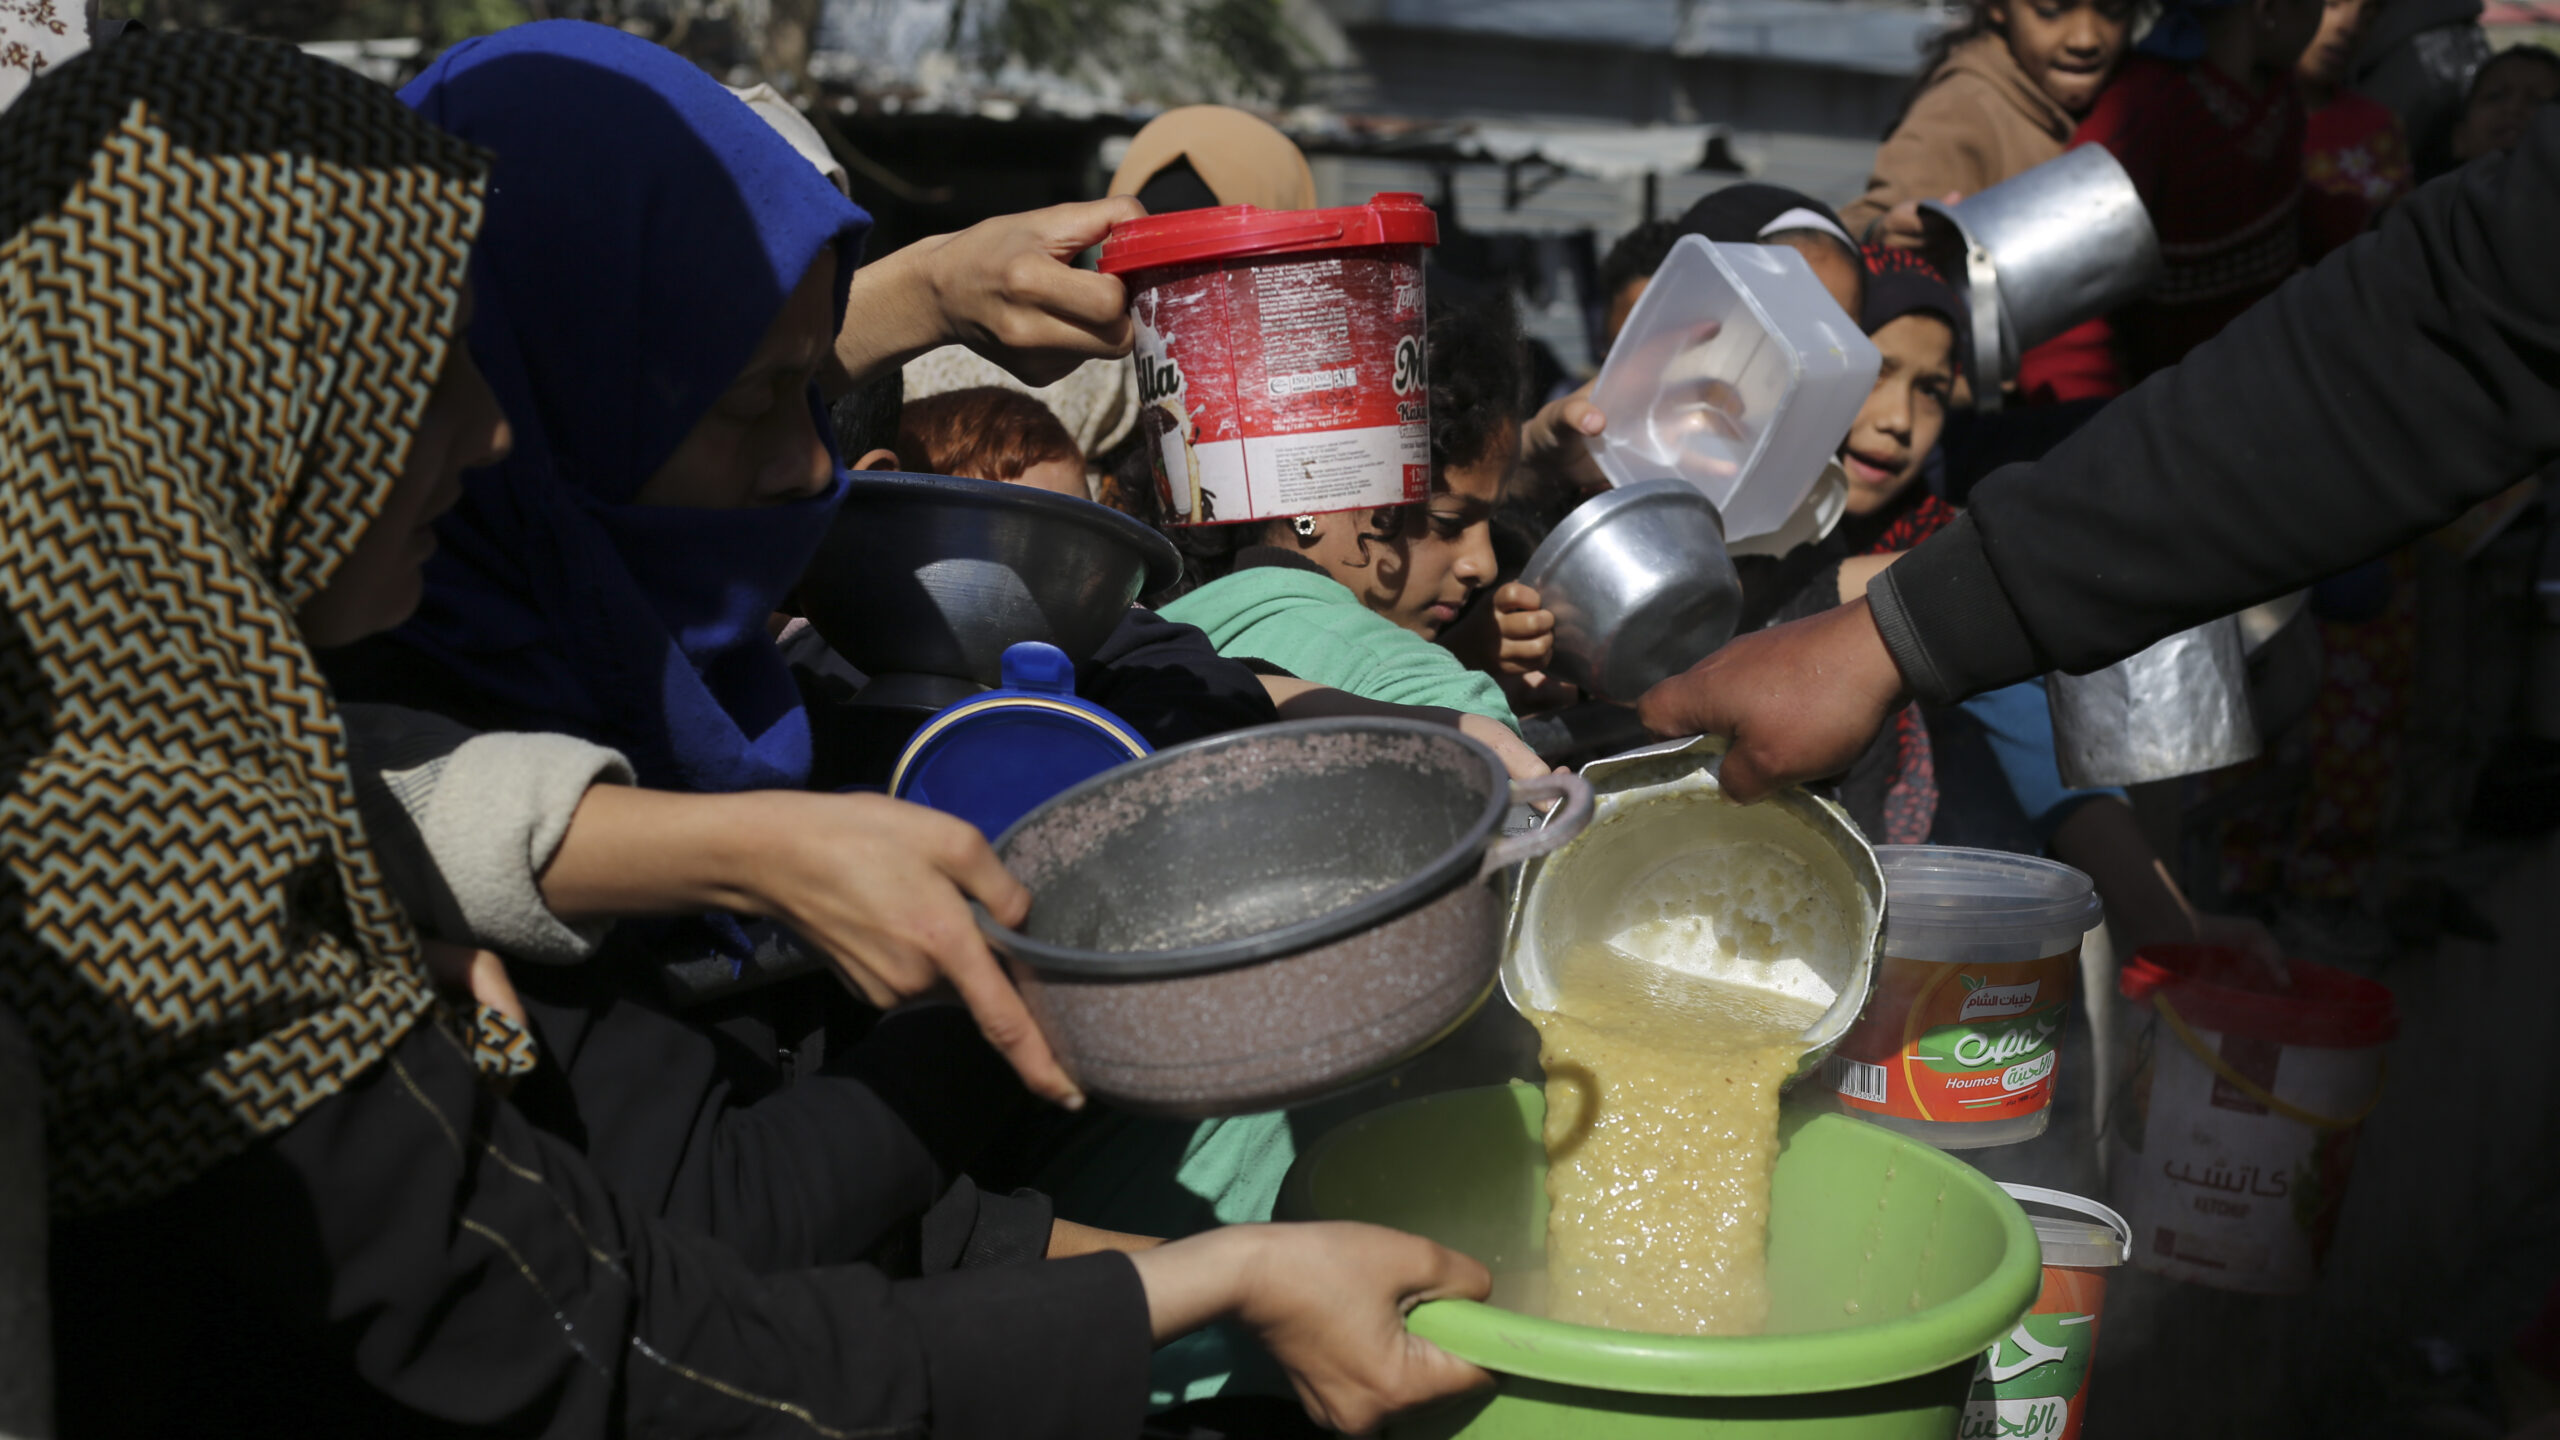 An inside account of delivering aid to Gaza: ‘Each time it’s getting more desperate’